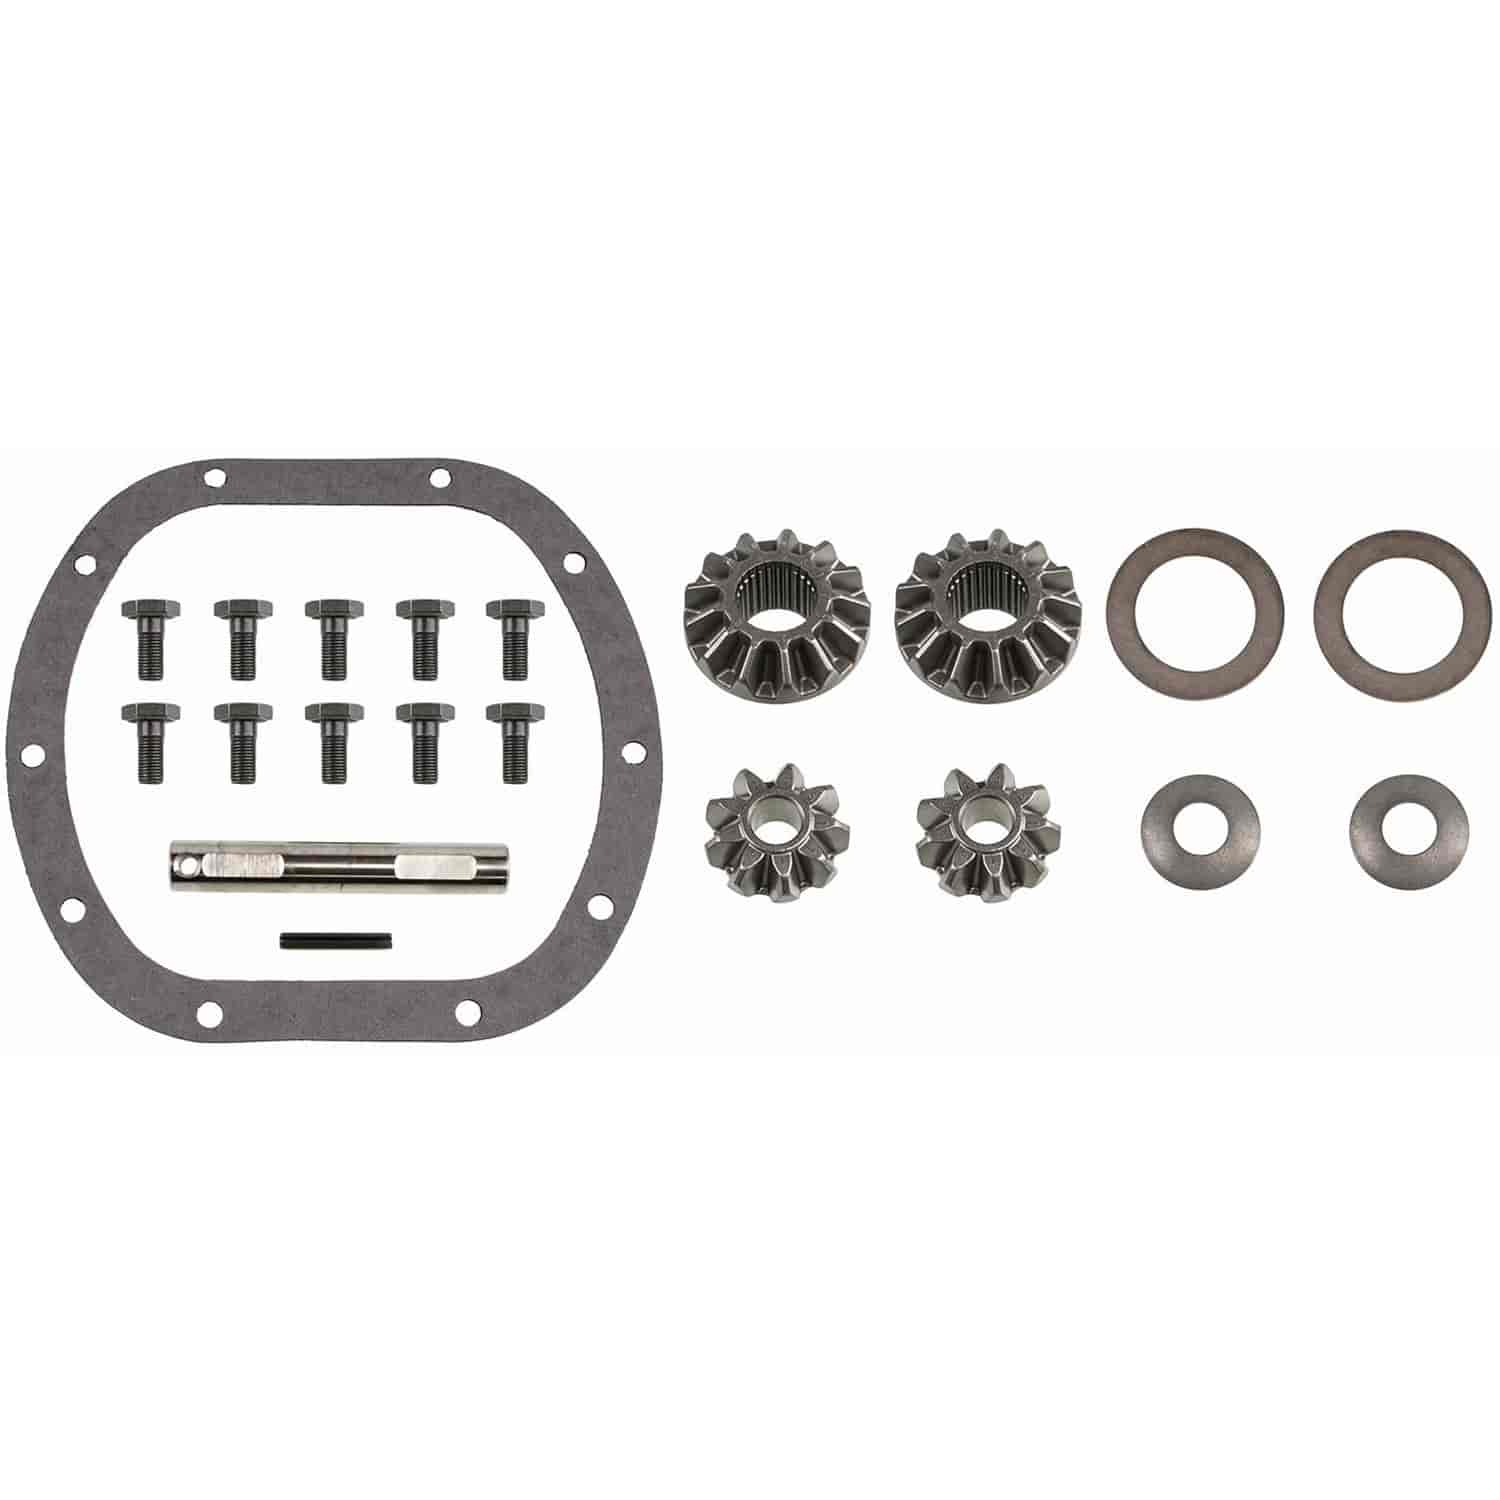 Open Differential Internal Kit Incl. Side And Pinion Gears/Washers/Pinion Shaft And Lock Bolt Or Roll Pin